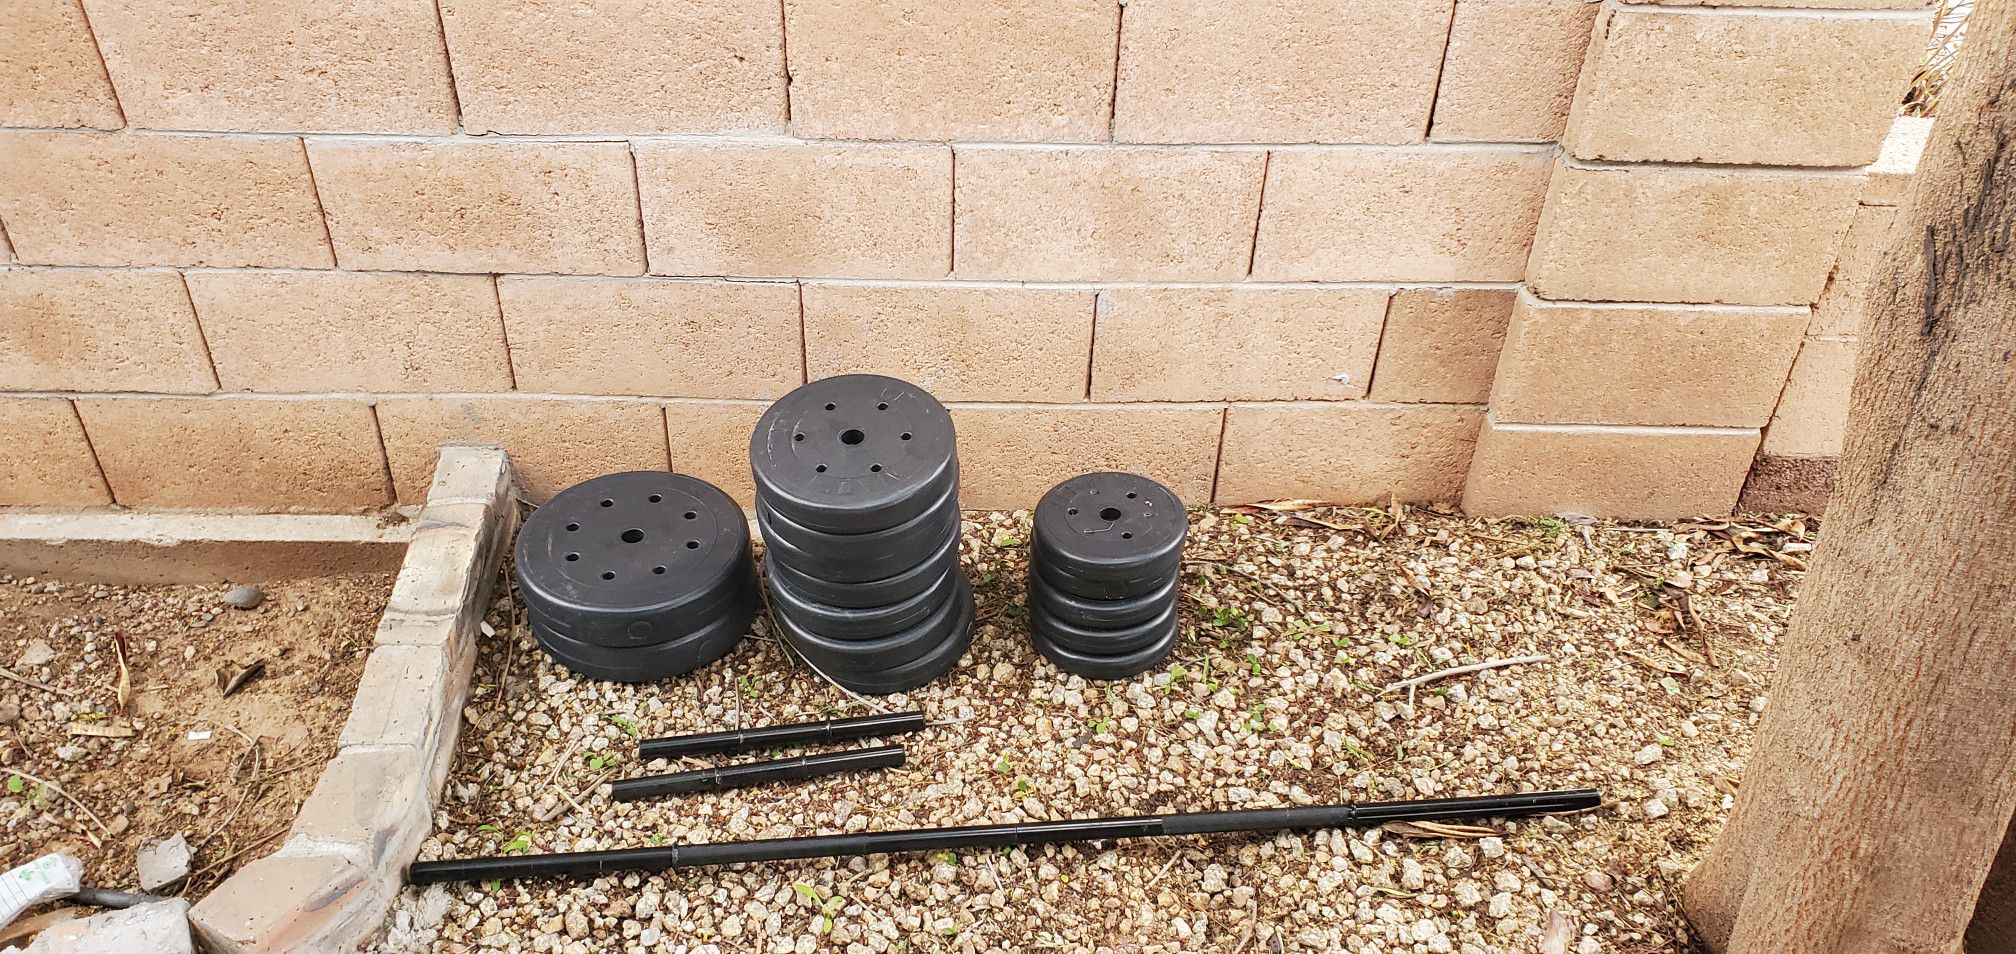 Brand new weight set with 3 bars